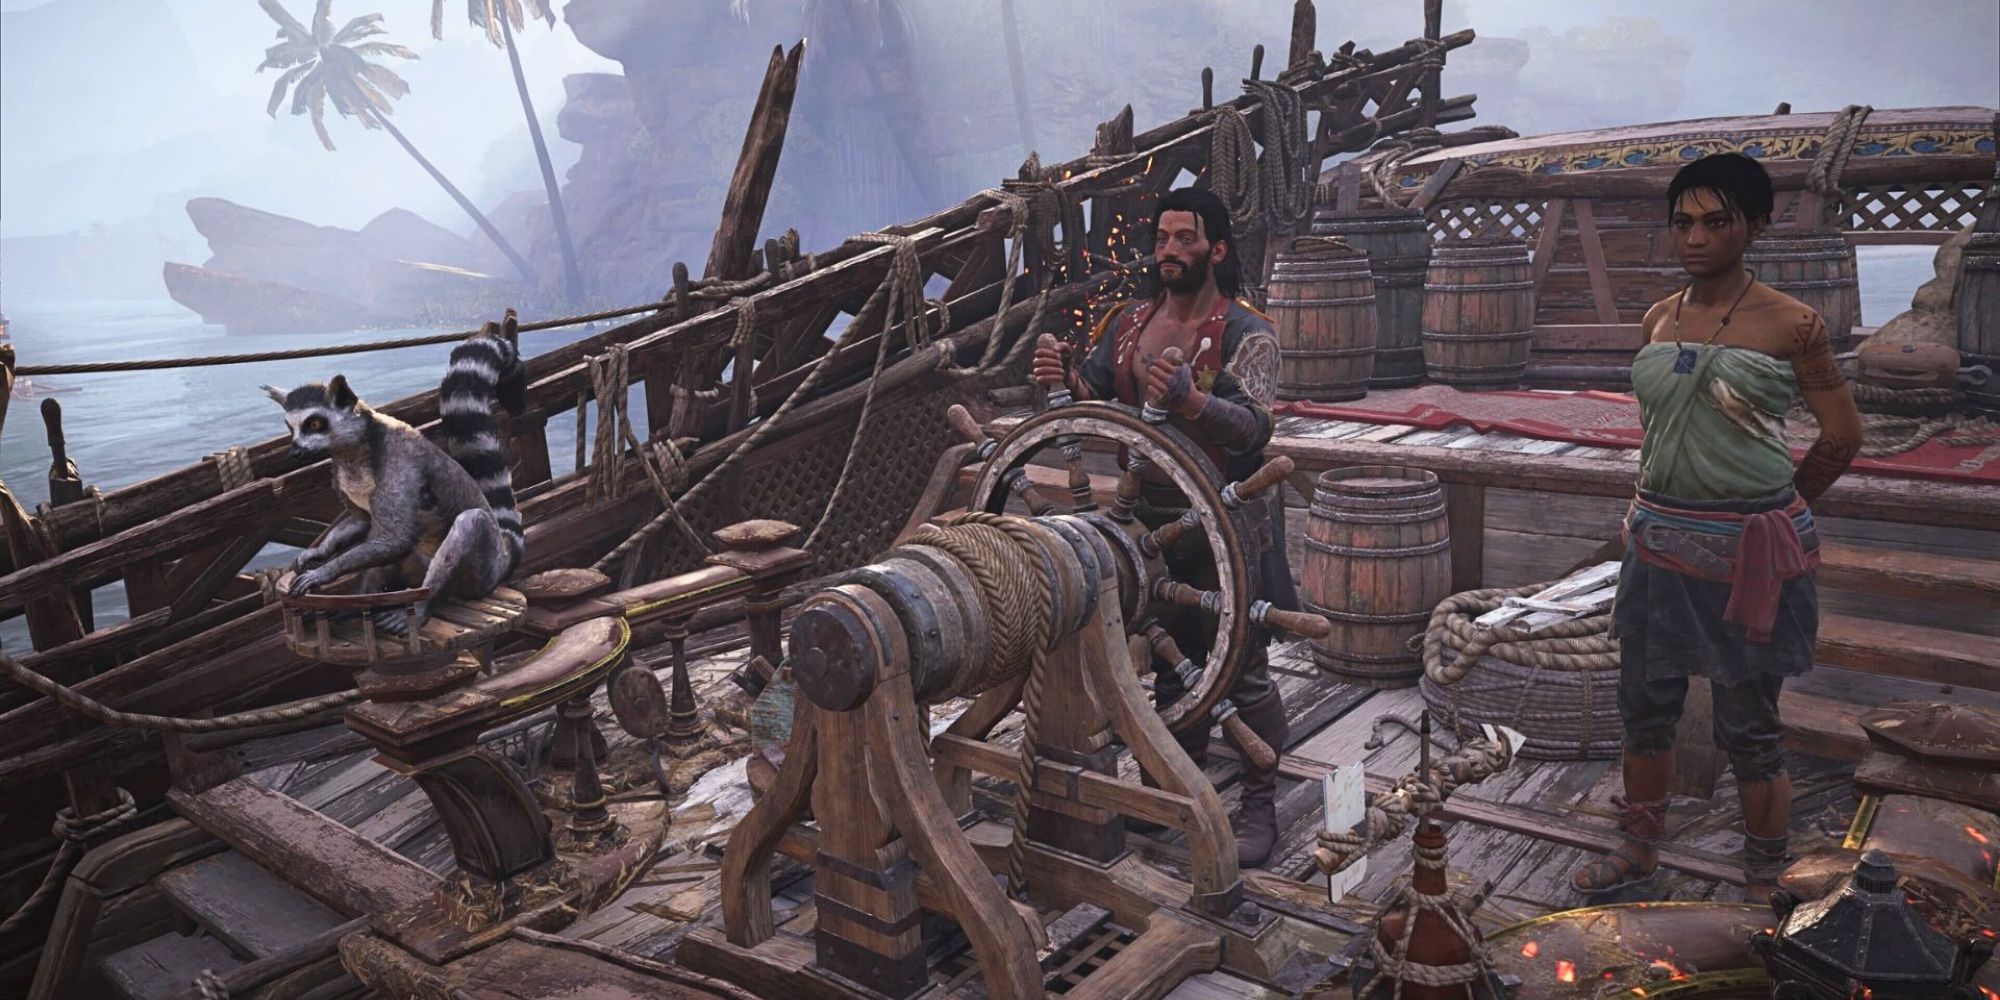 A Skull and Bones character steering his ship